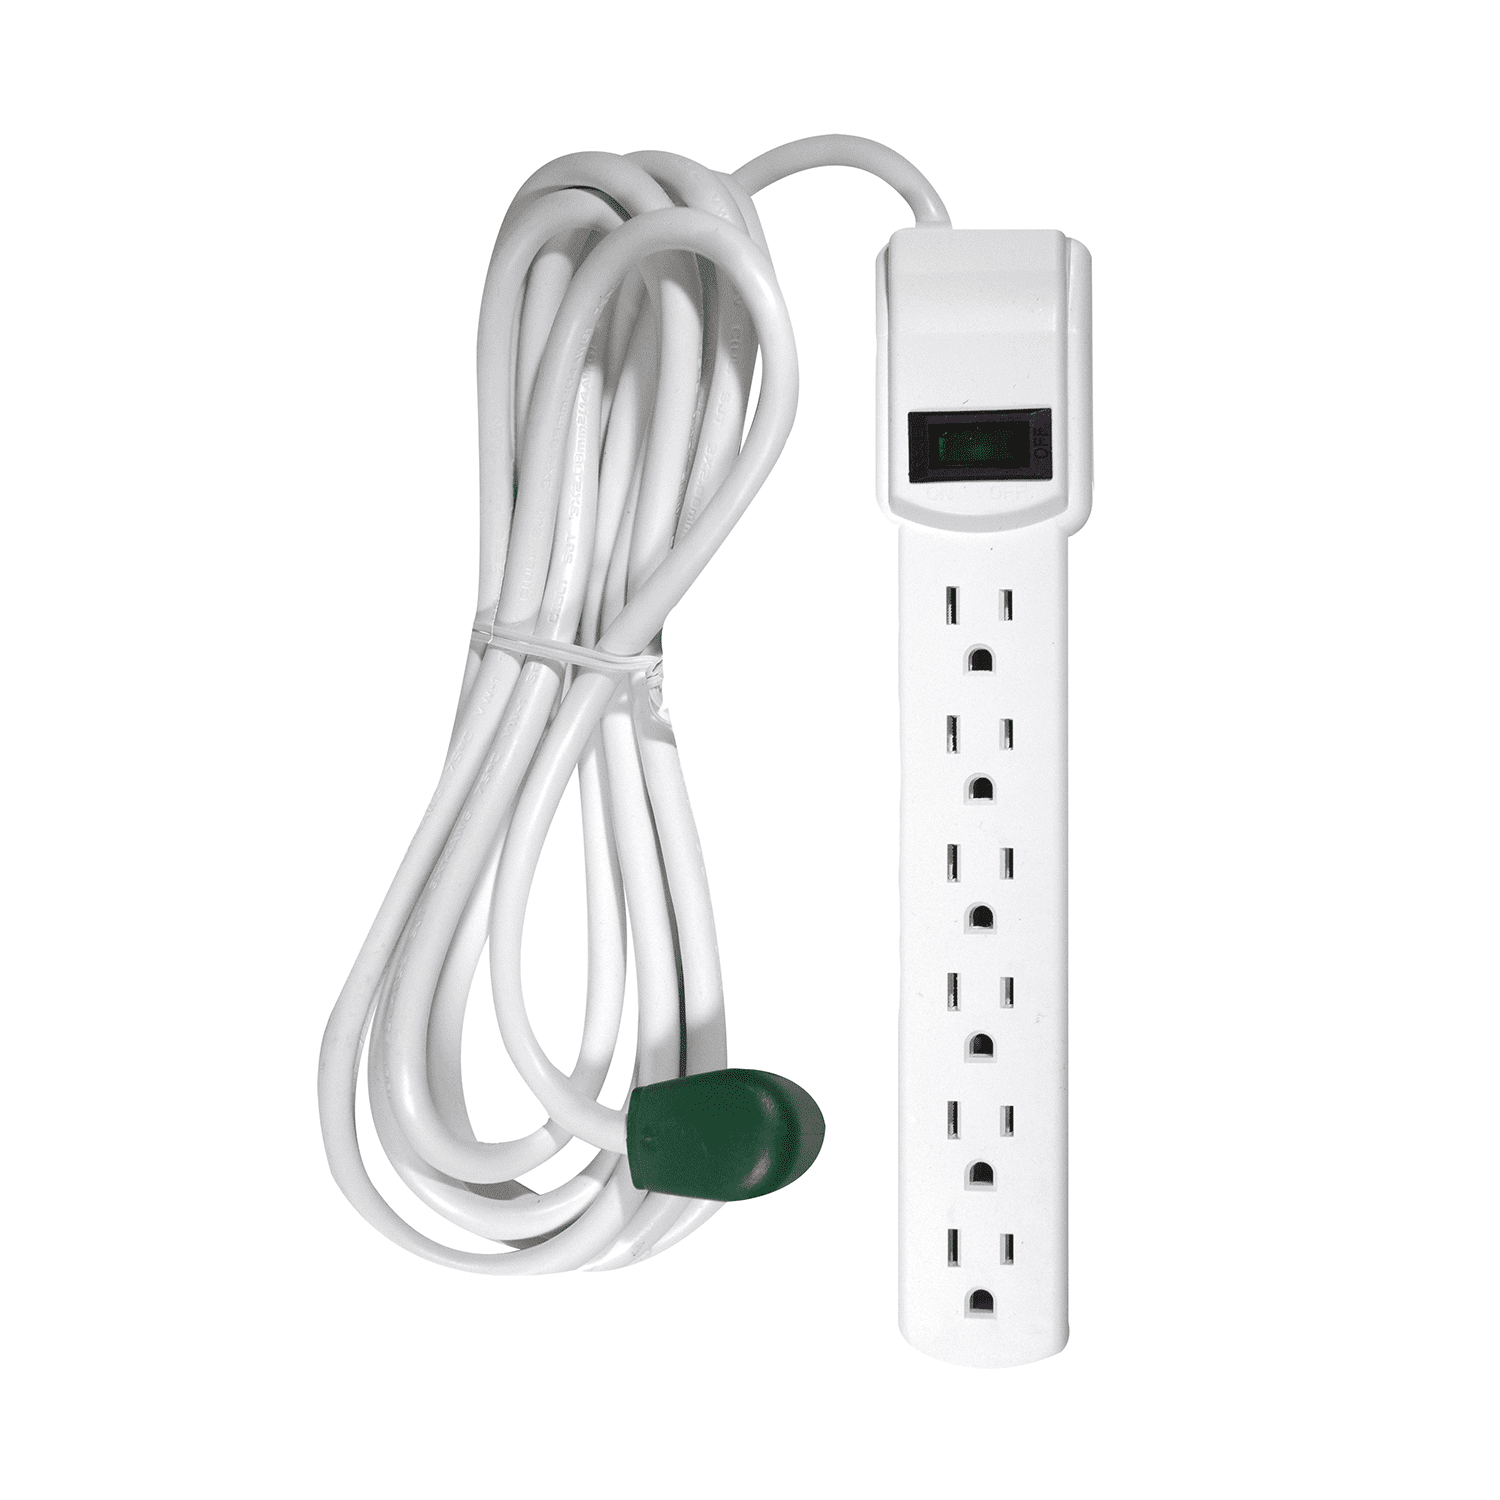 GoGreen Power GG-16103MS 6 Outlet Surge Protector w/ 2.5' Cord